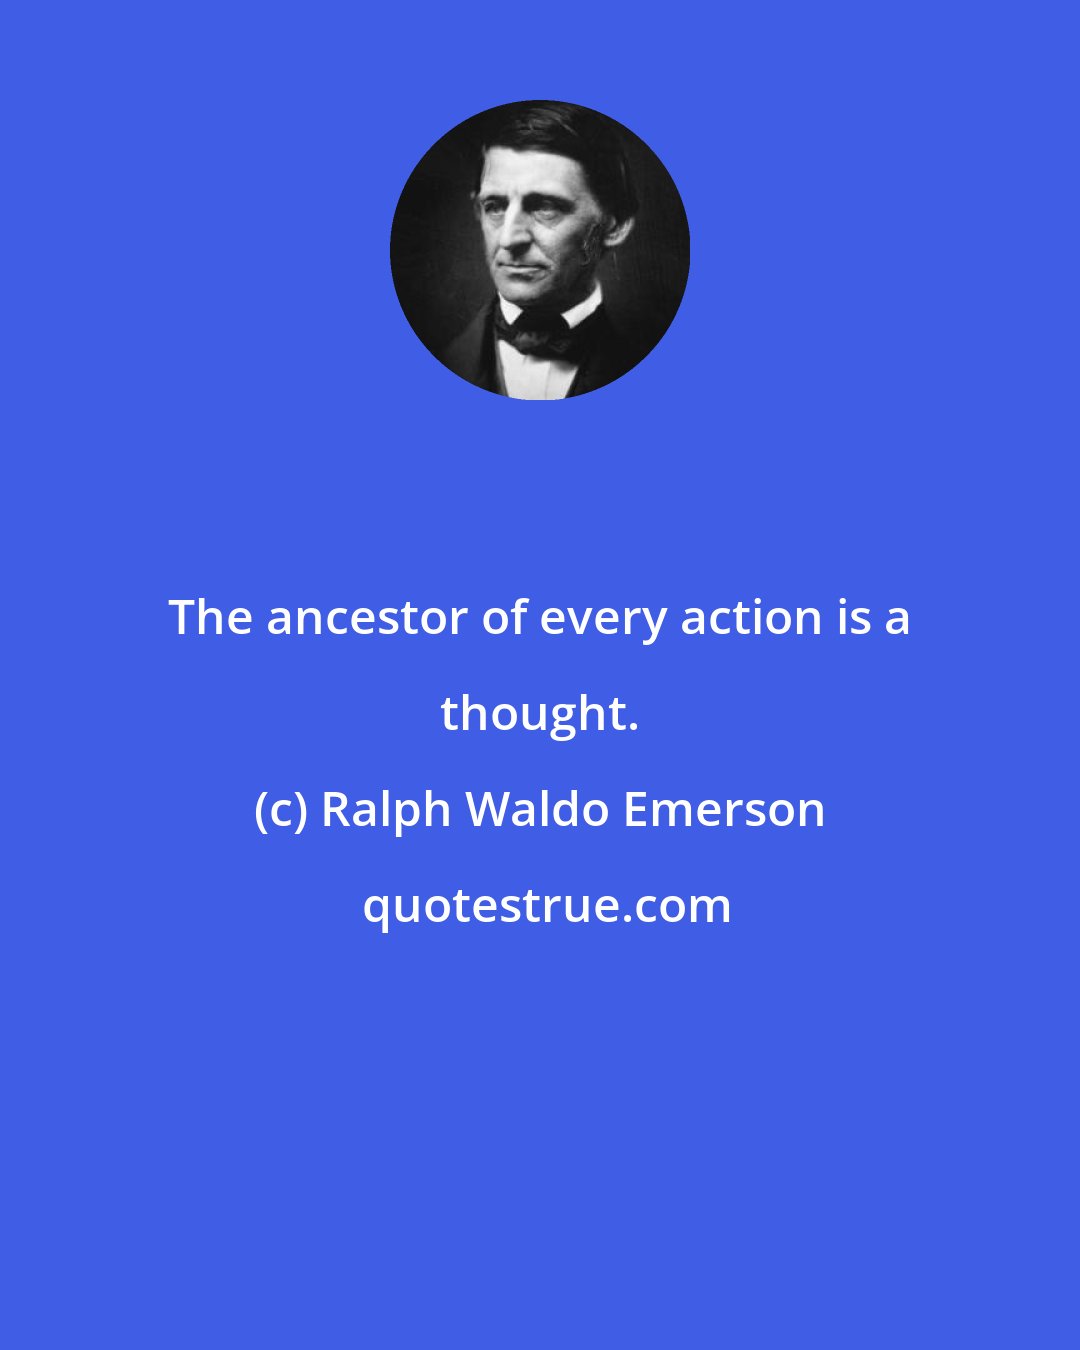 Ralph Waldo Emerson: The ancestor of every action is a thought.